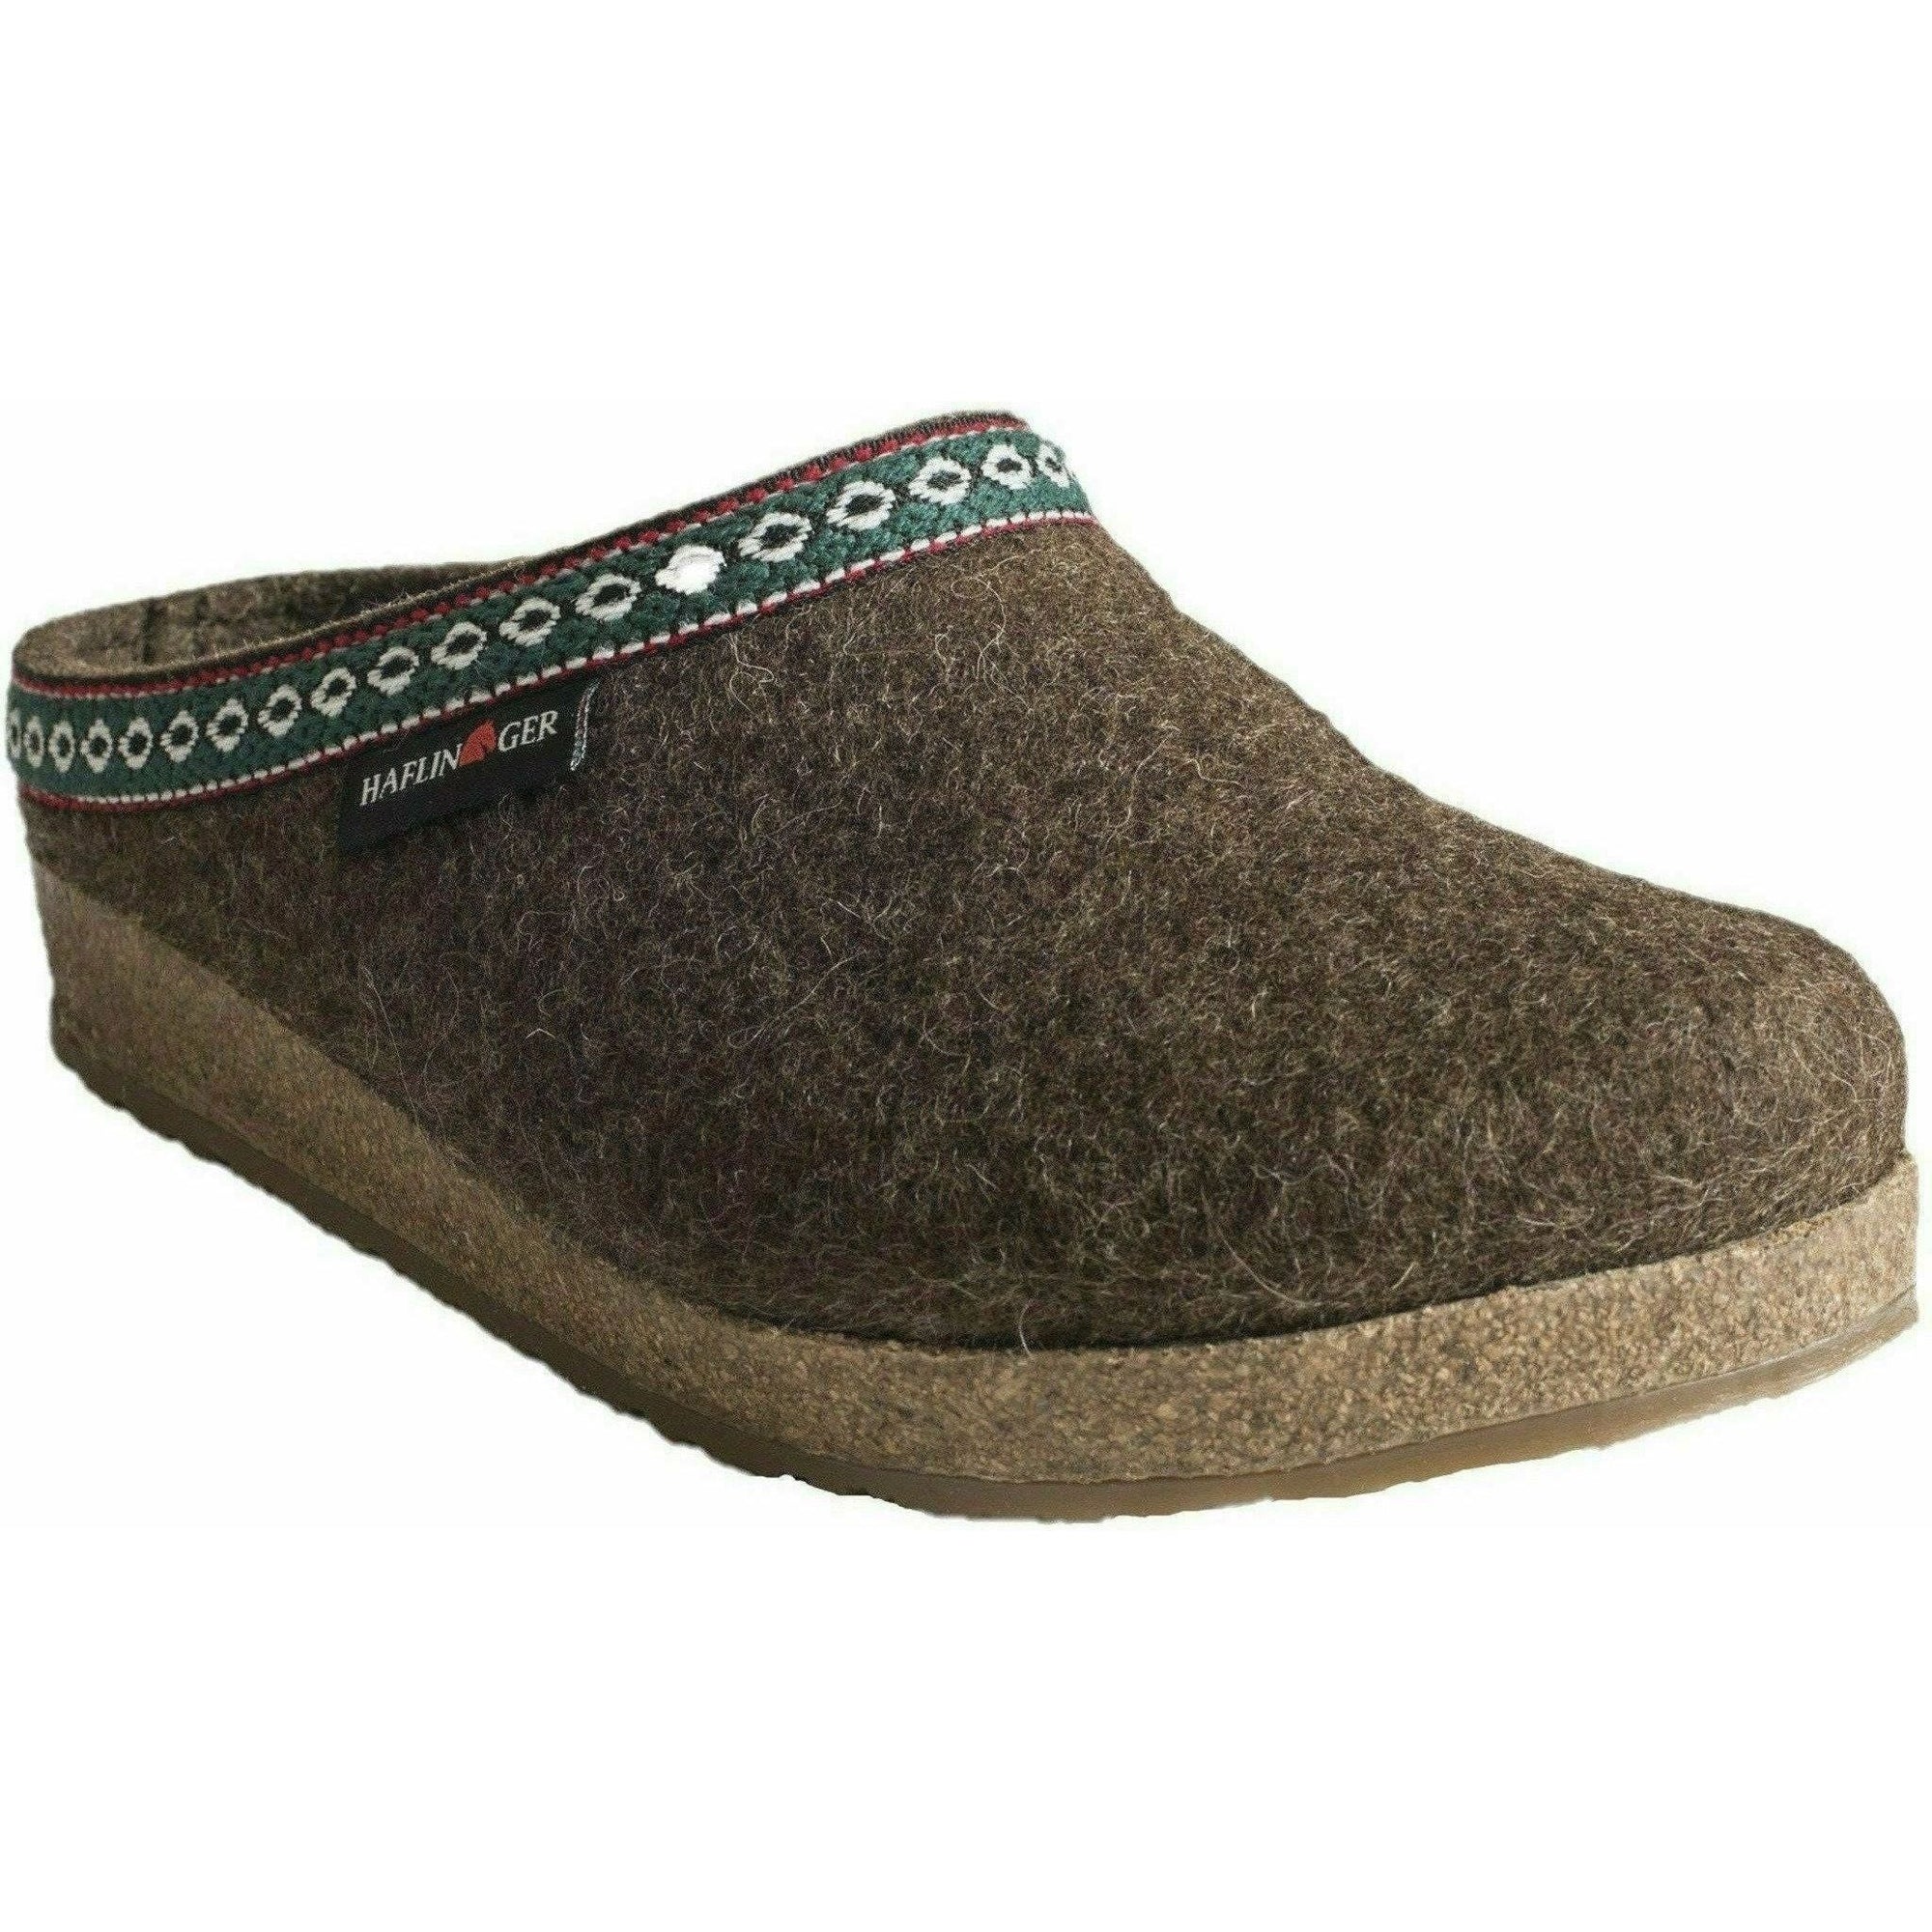 Haflinger GZ Classic Grizzly Wool Clog